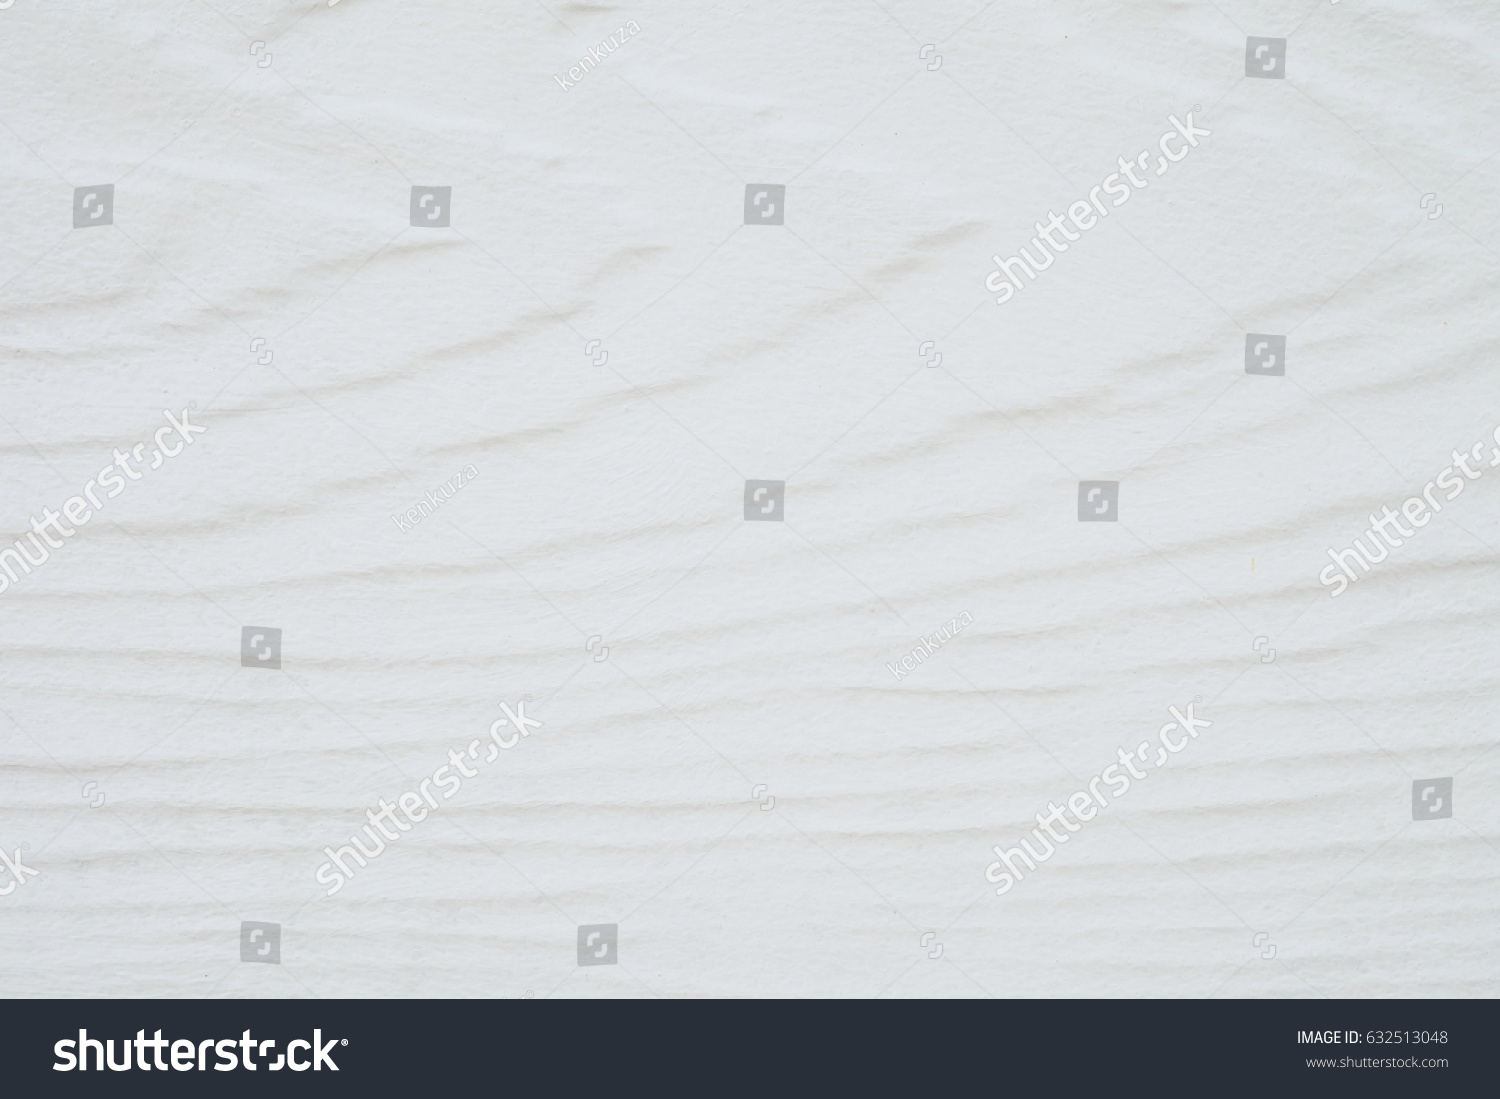 Closeup surface wood pattern at white wood board at the wall texture background #632513048